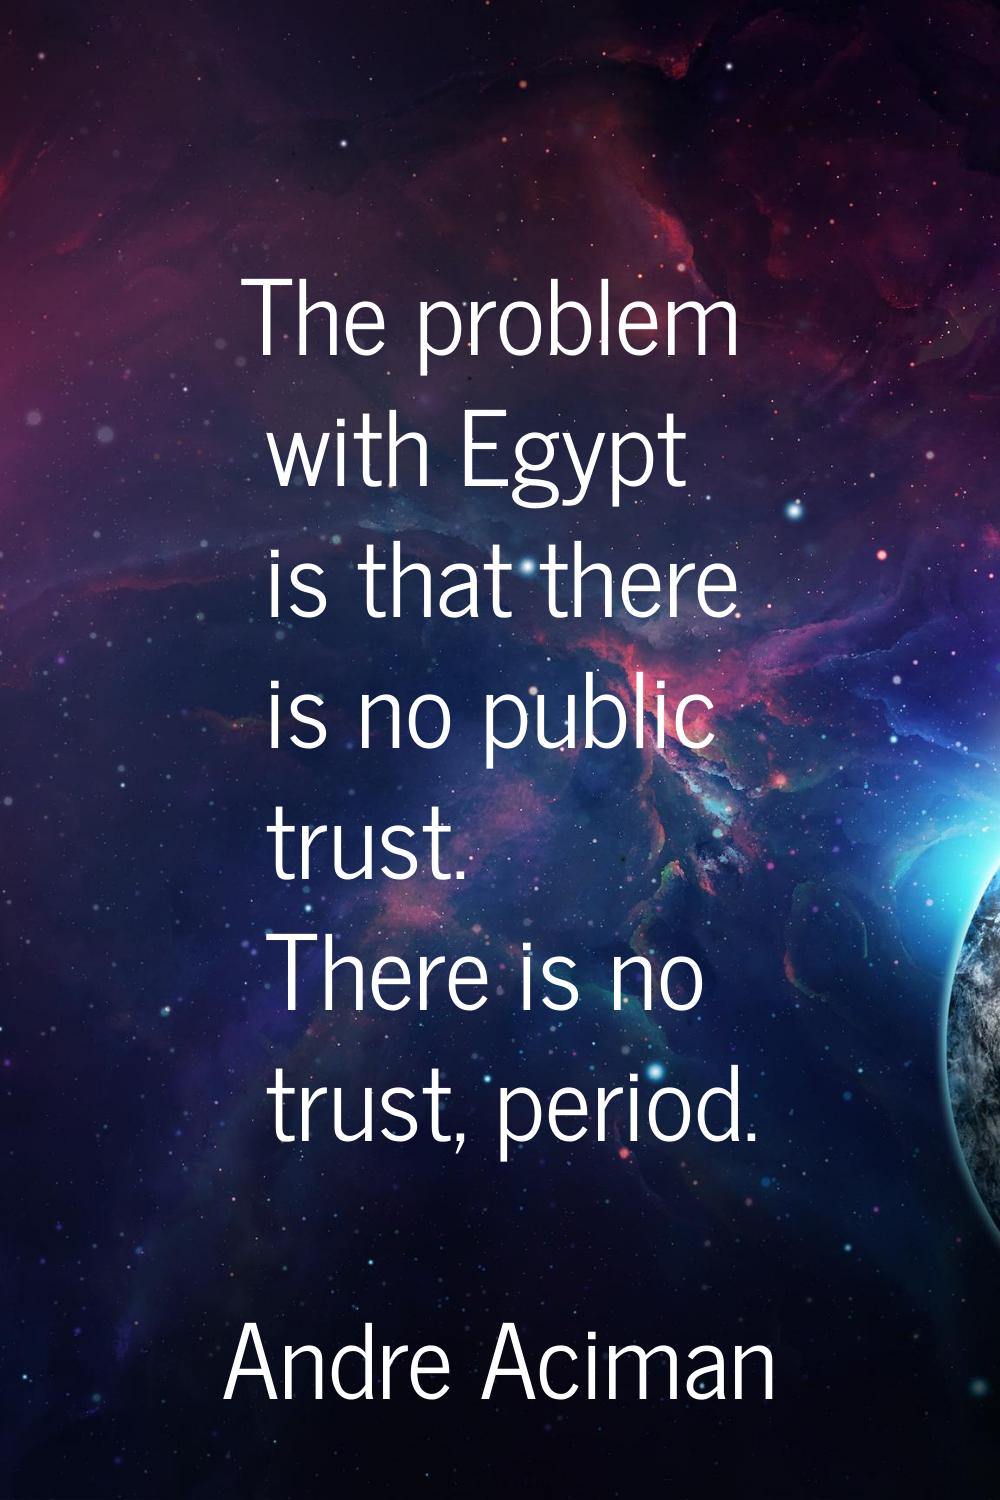 The problem with Egypt is that there is no public trust. There is no trust, period.